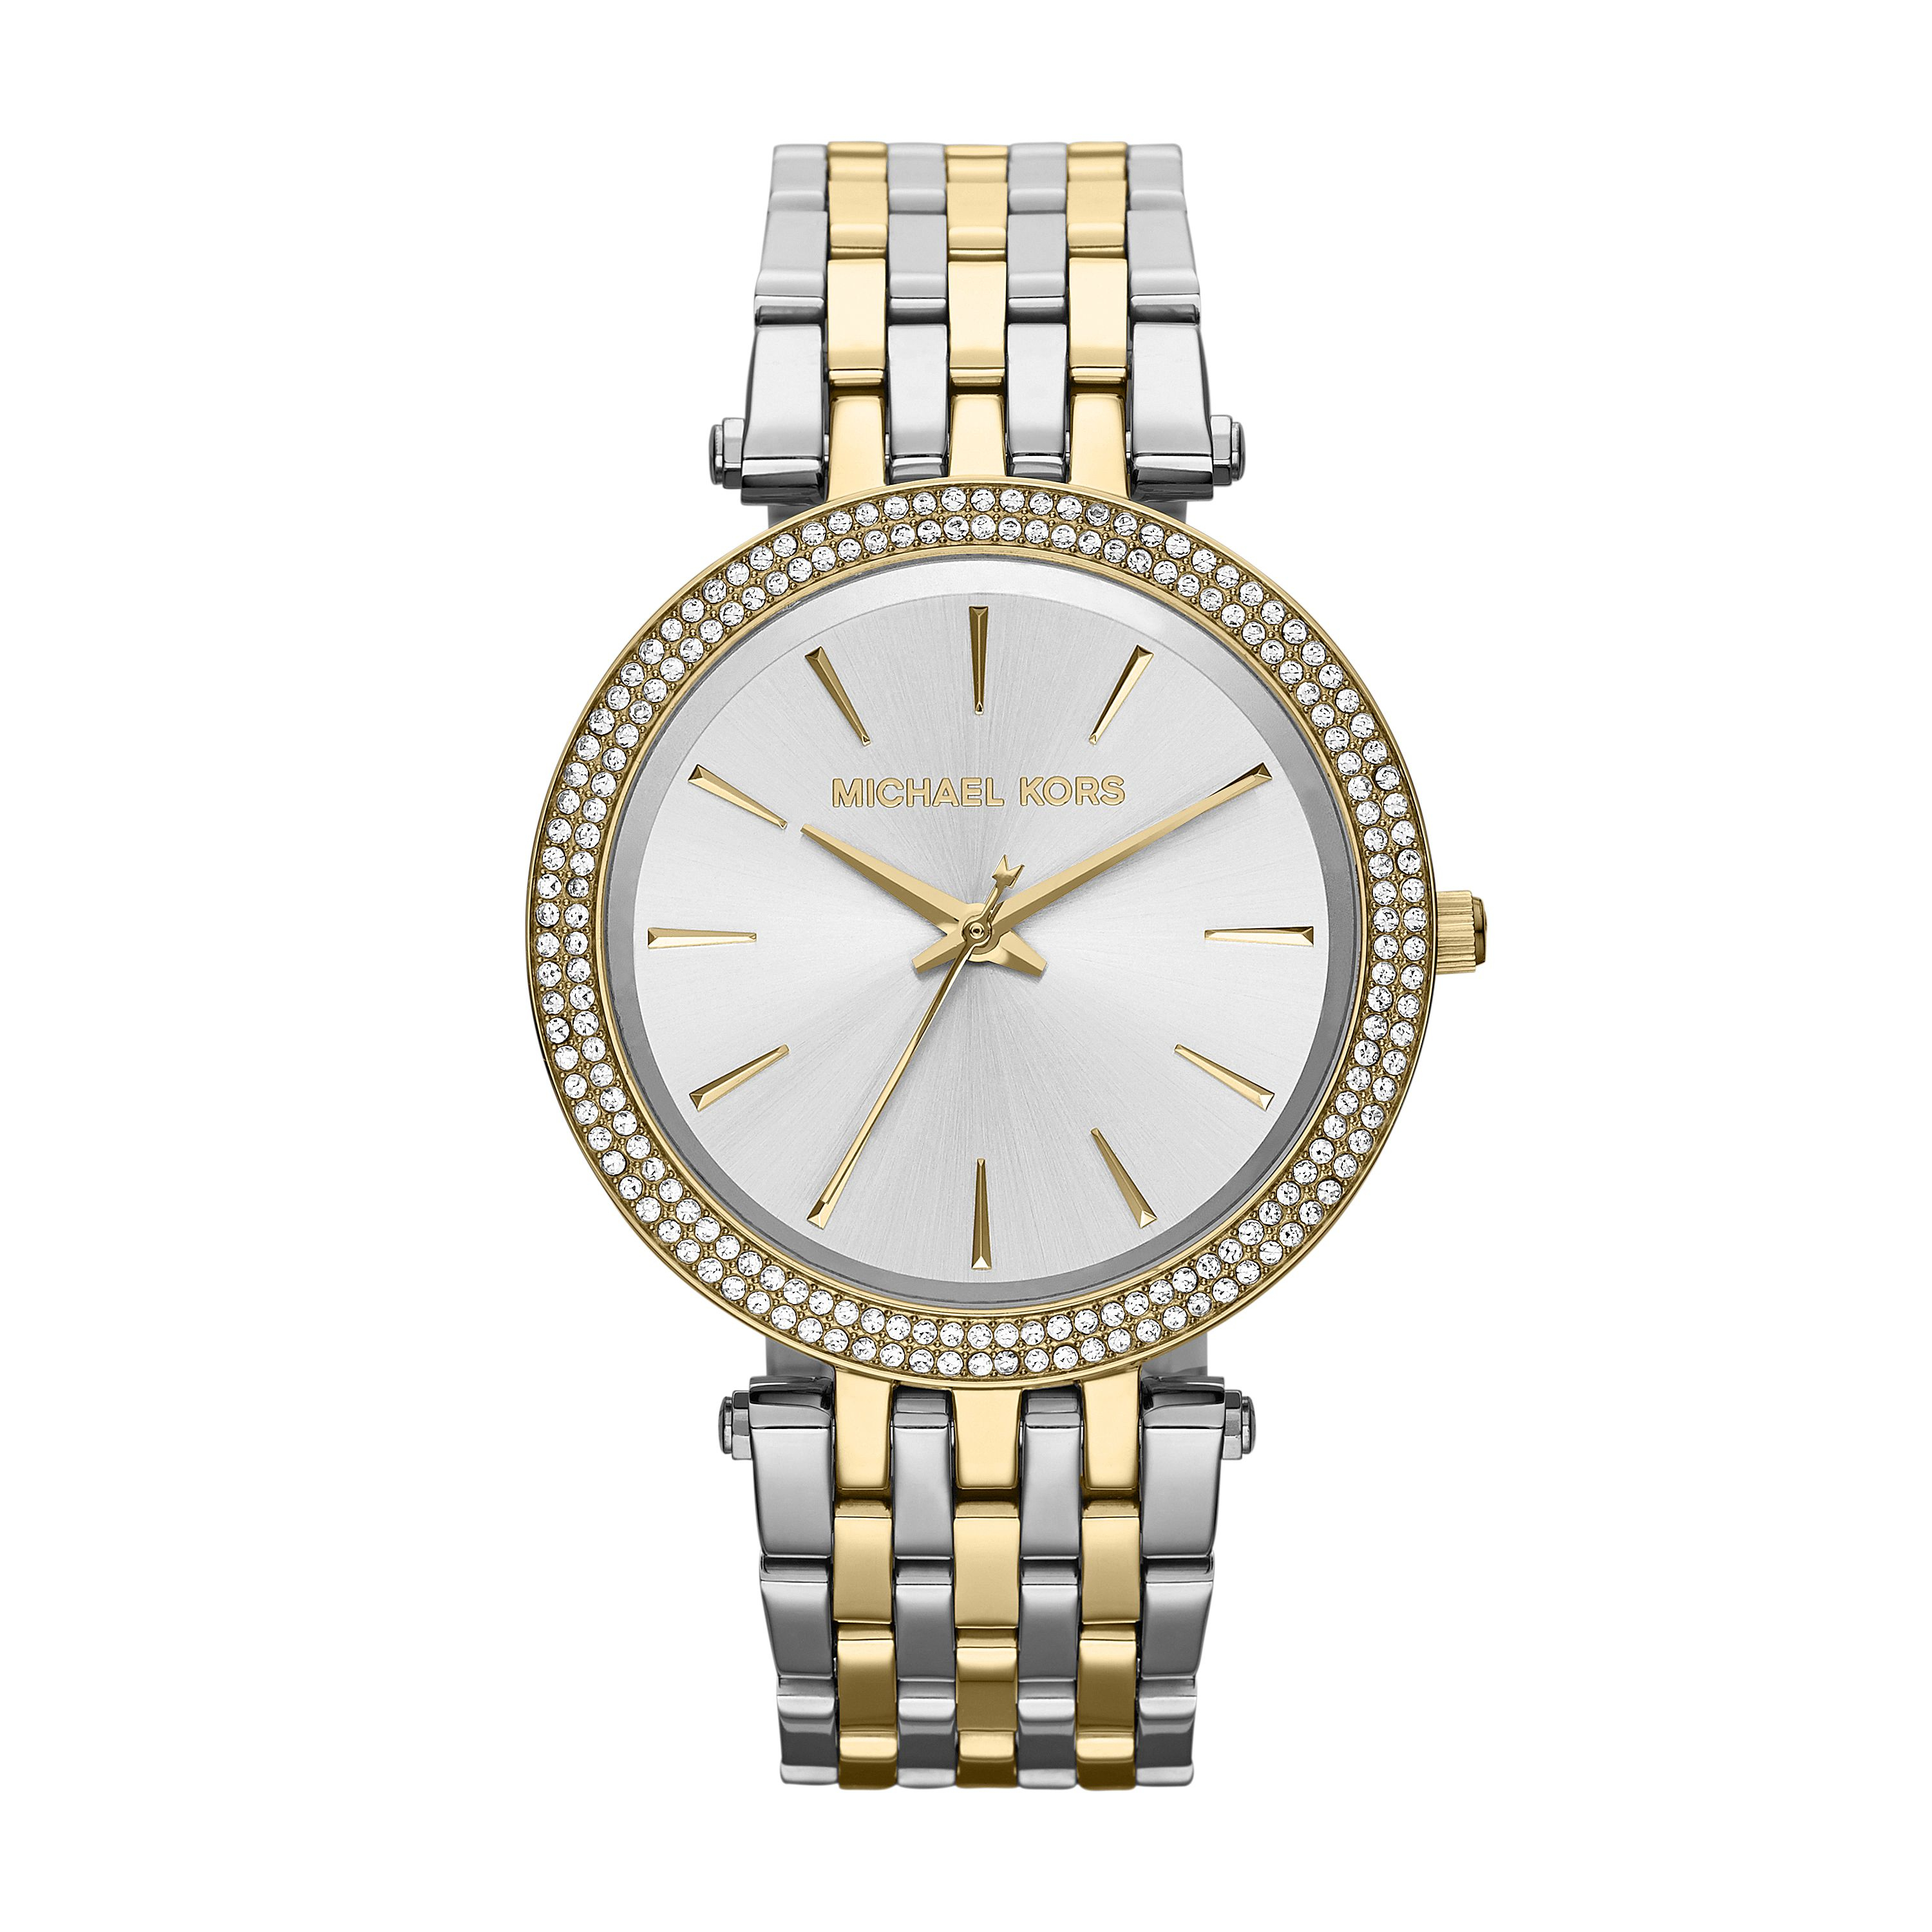 Michael kors Mk3215 Darci Silver And Gold Ladies Watch | Lyst